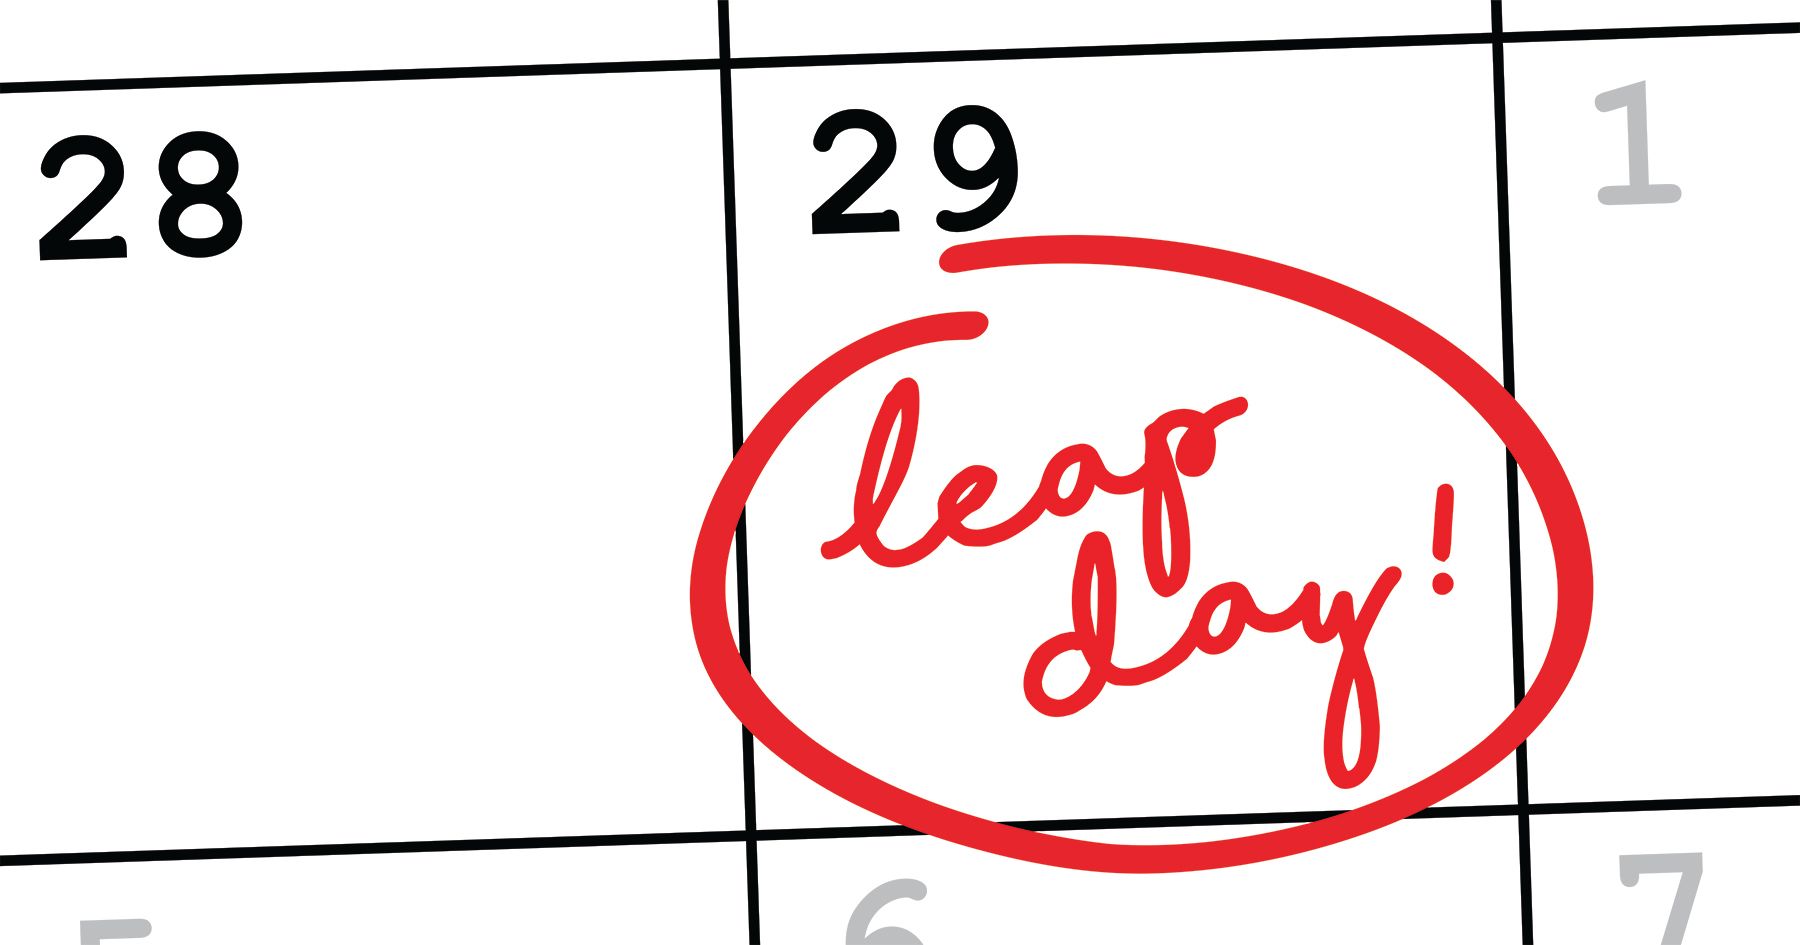 Leap Day; Source: latenightparents